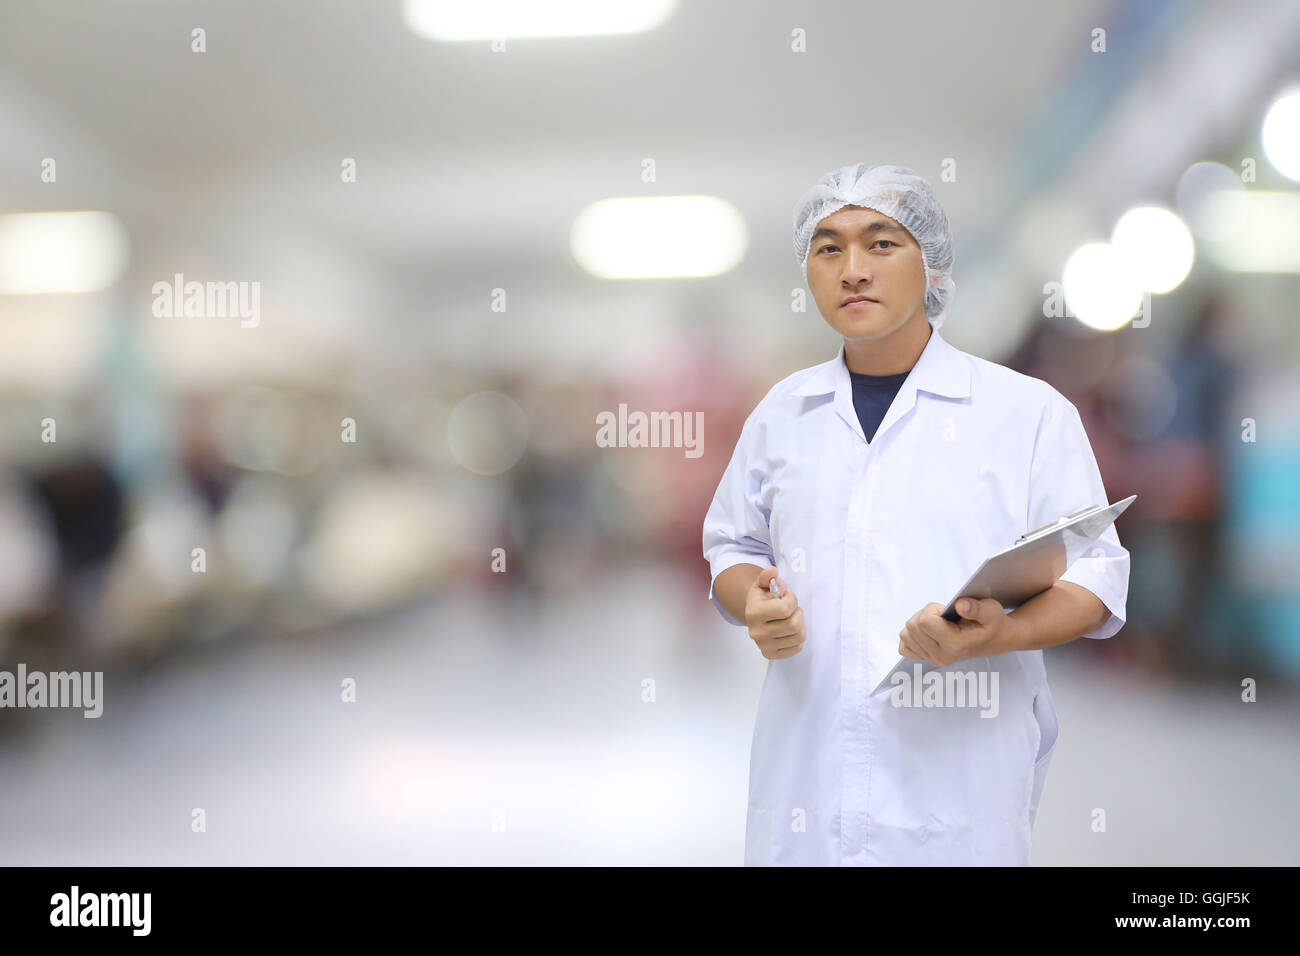 A Man in doctor white dress on interior hospital of blur background for the health concept and medicine. Stock Photo